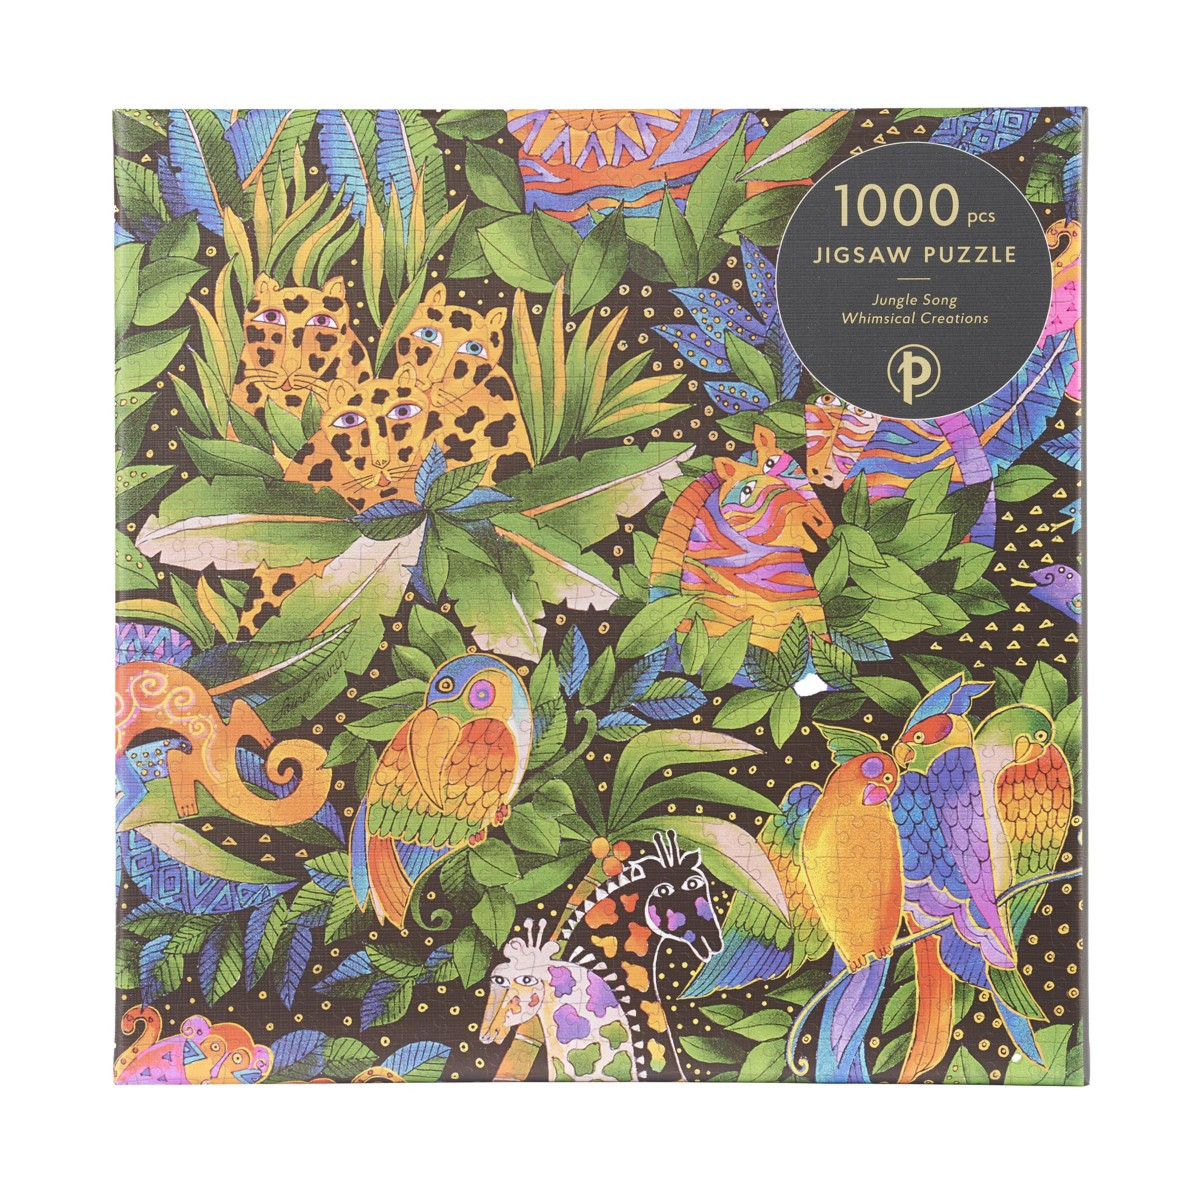 Jigsaw Puzzles Whimsical Creations, Jungle Song, 1000 PC